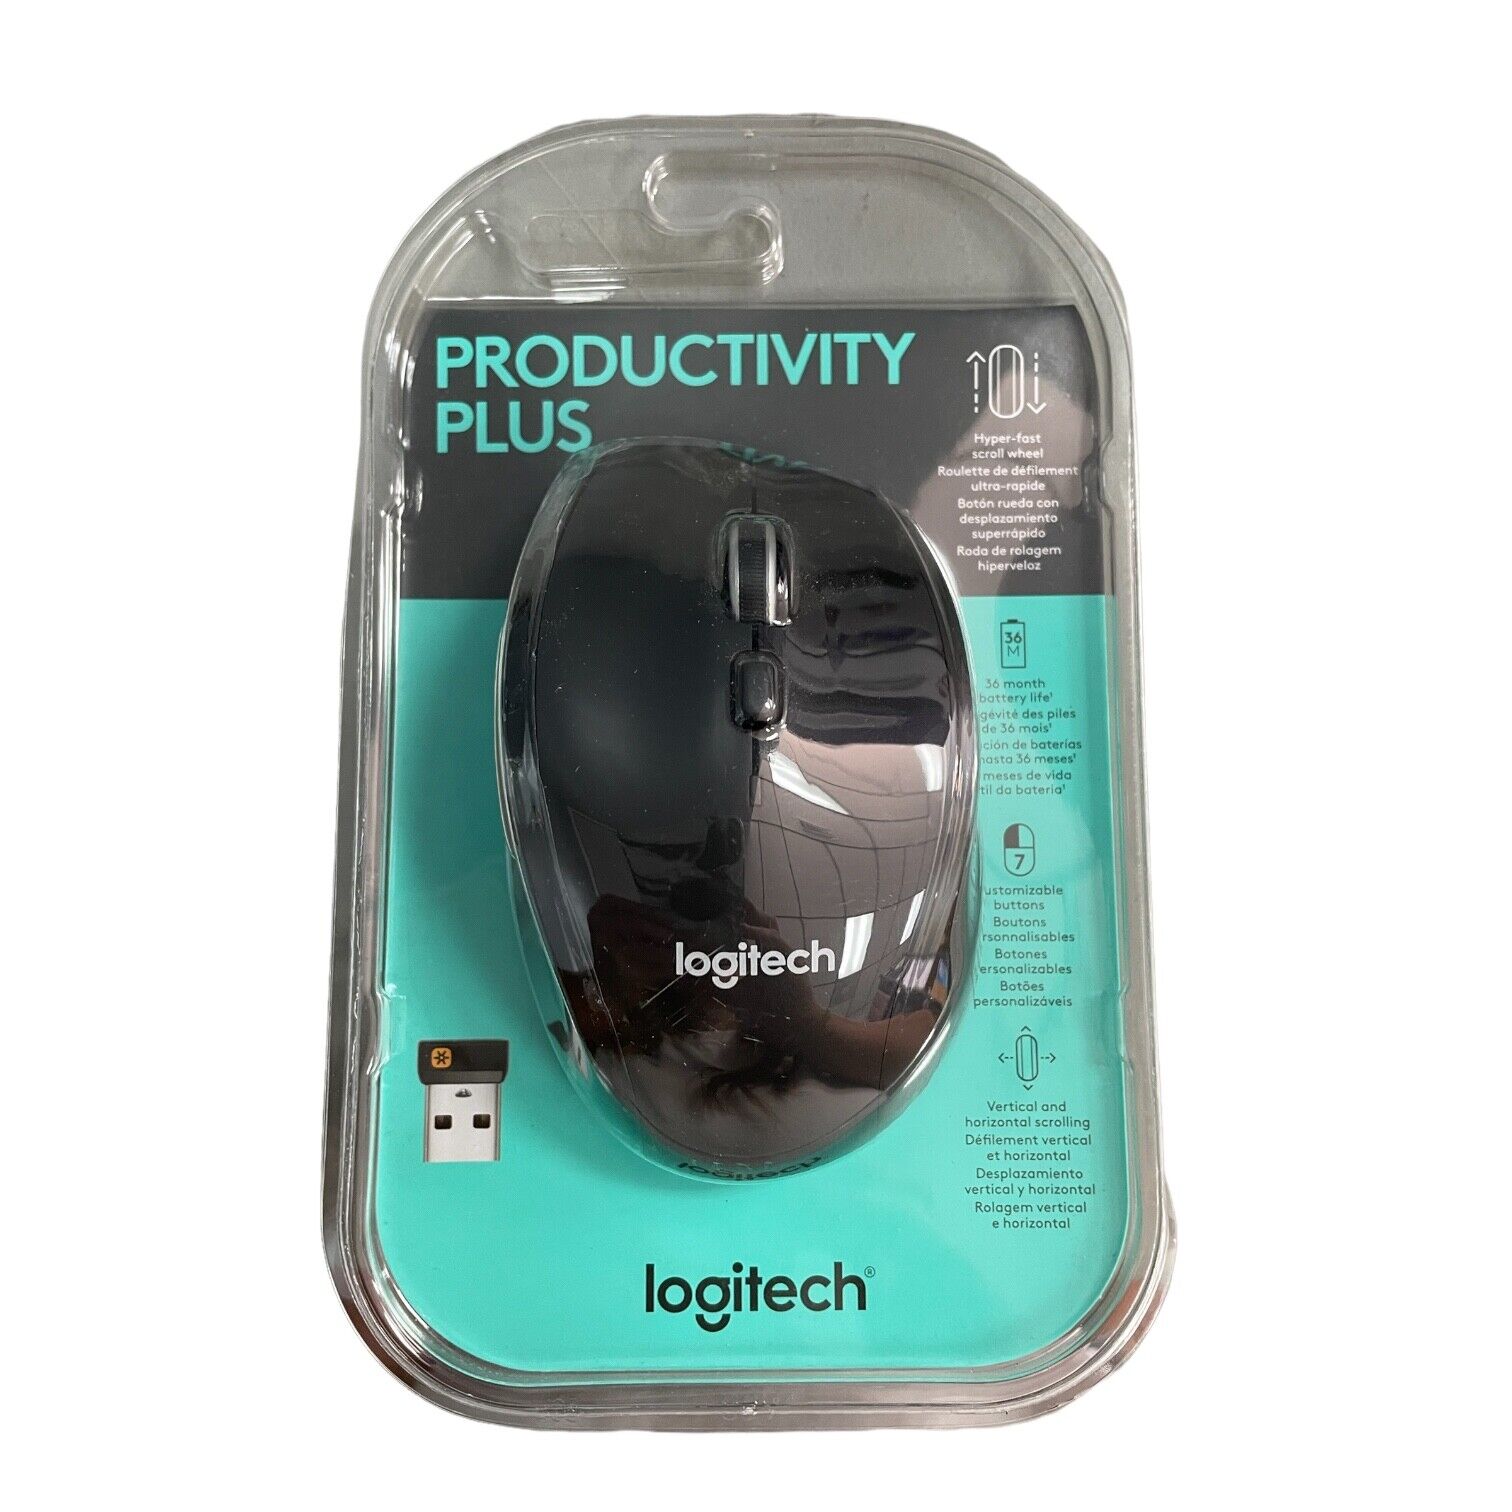 Logitech Productivity Plus Wireless Mouse with 7 Buttons - Black (910-005746)